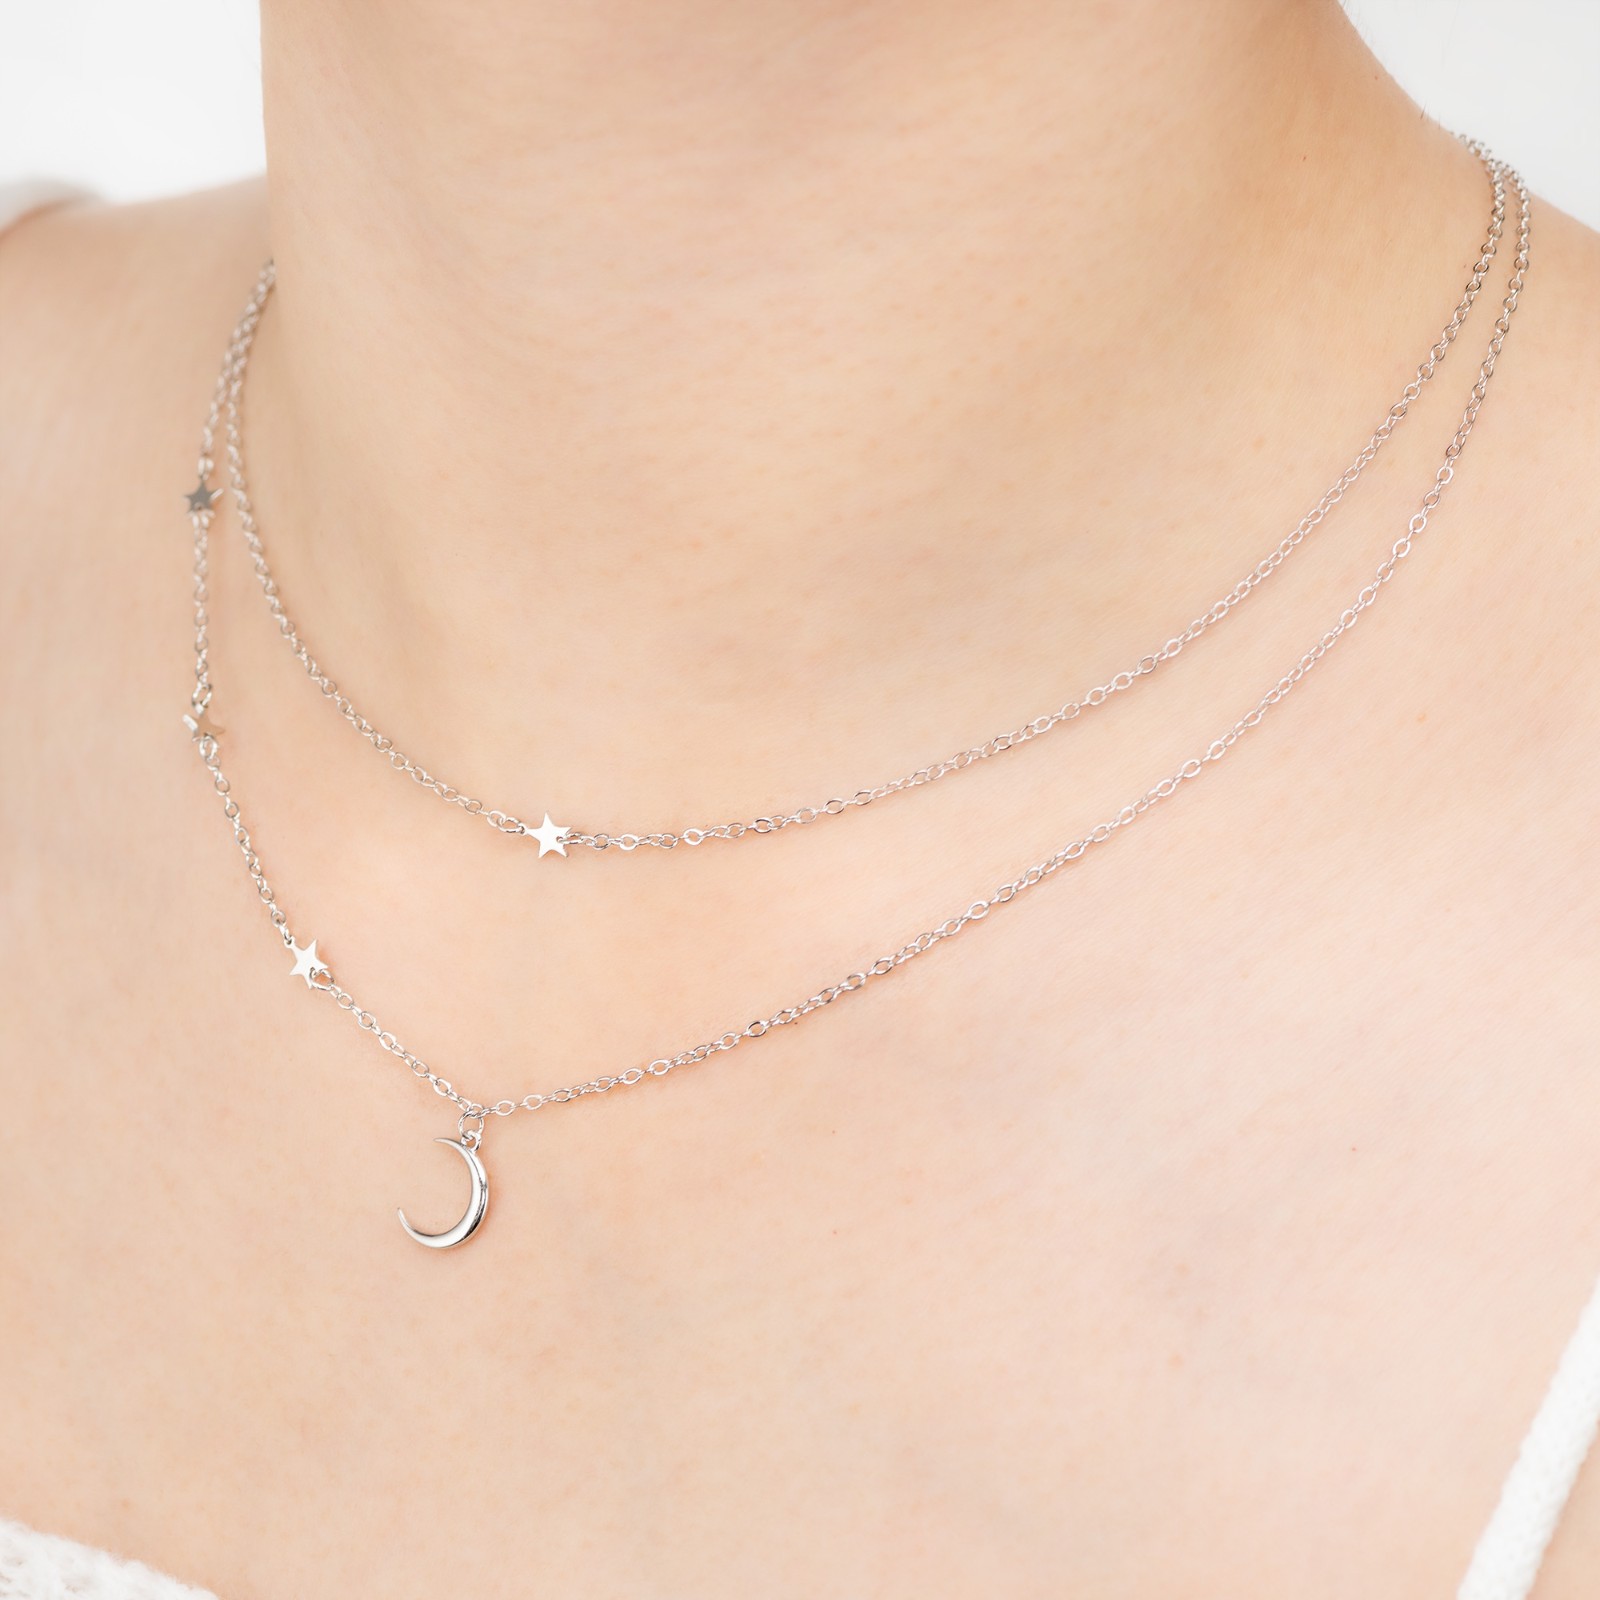 Layered Moon Star Necklace Simple Star Choker Necklace Crescent Charm Pendant Necklace Jewelry for Women and Girls Gift